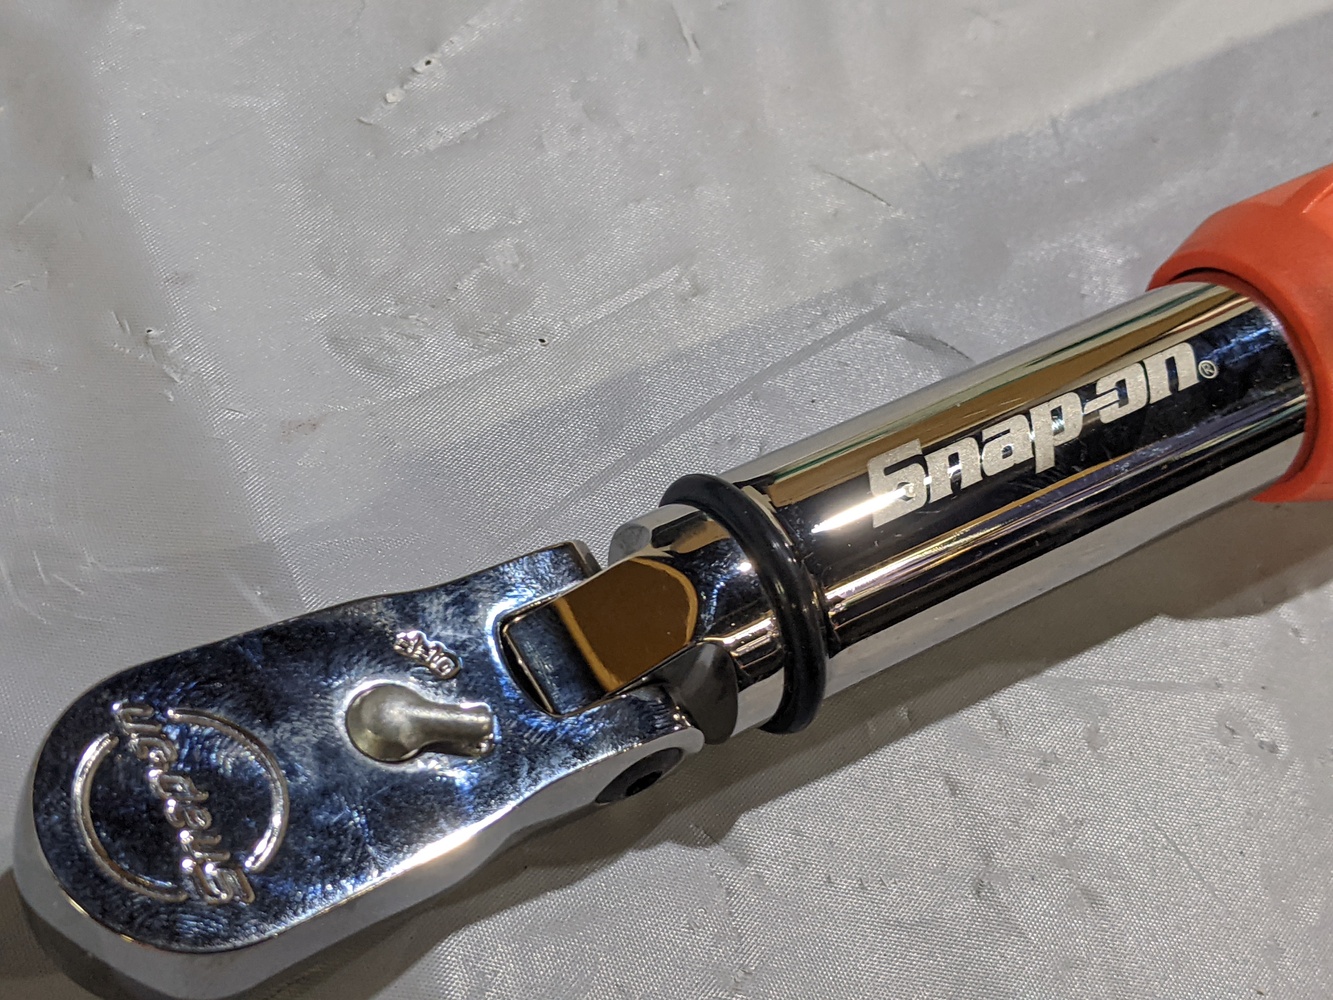 NEW SNAP-ON TECHANGLE TORQUE WRENCH DIGITAL LCD SCREEN DISPLAY